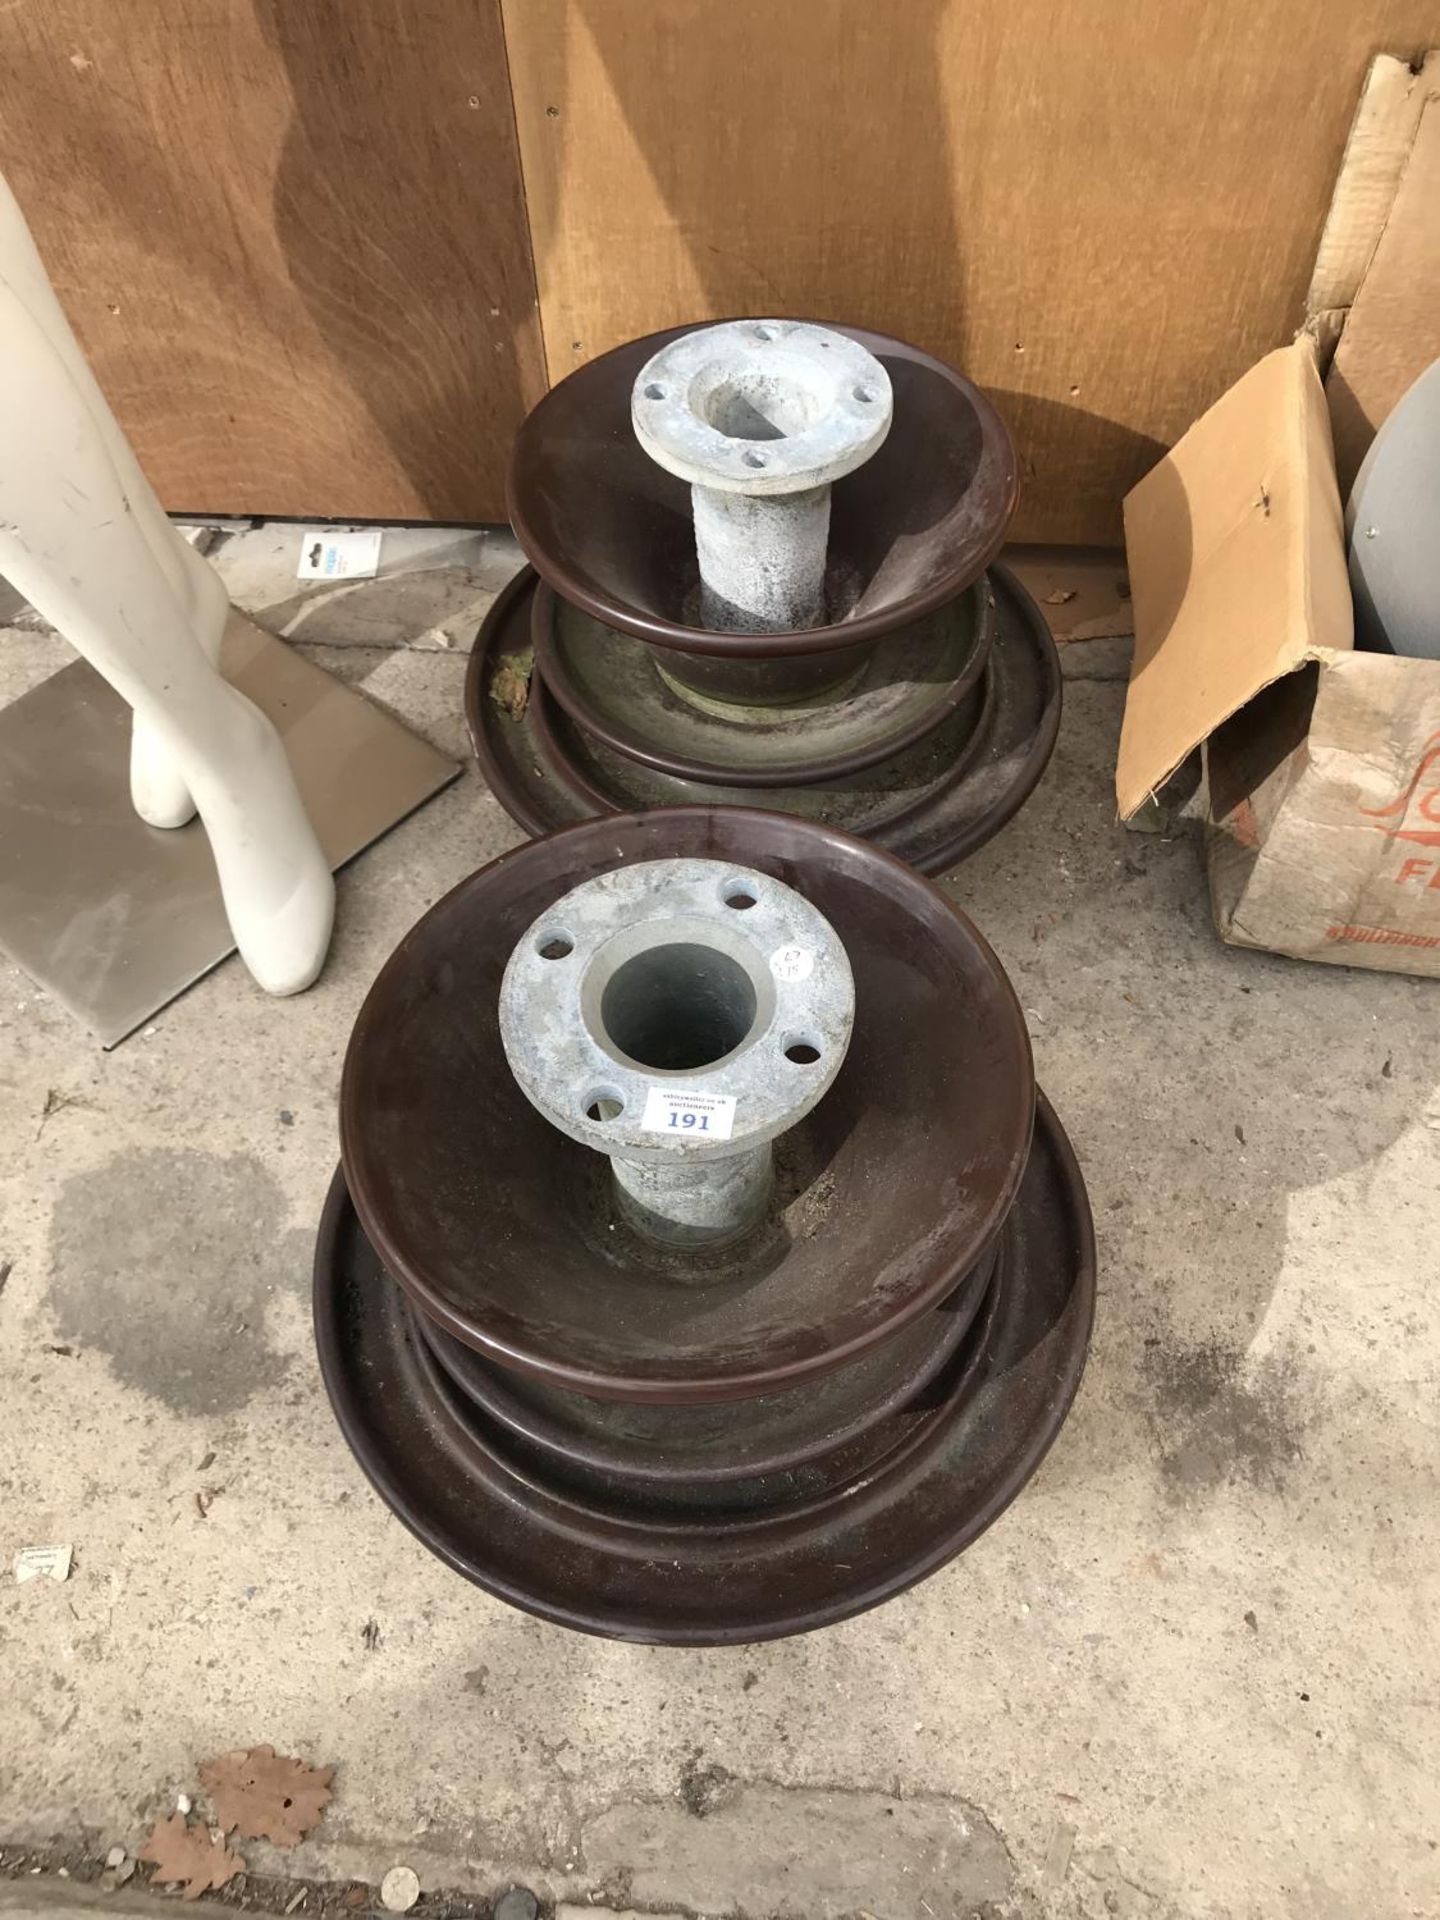 TWO POT ELECTRICAL INSULATORS FOR USE AS PLANTERS